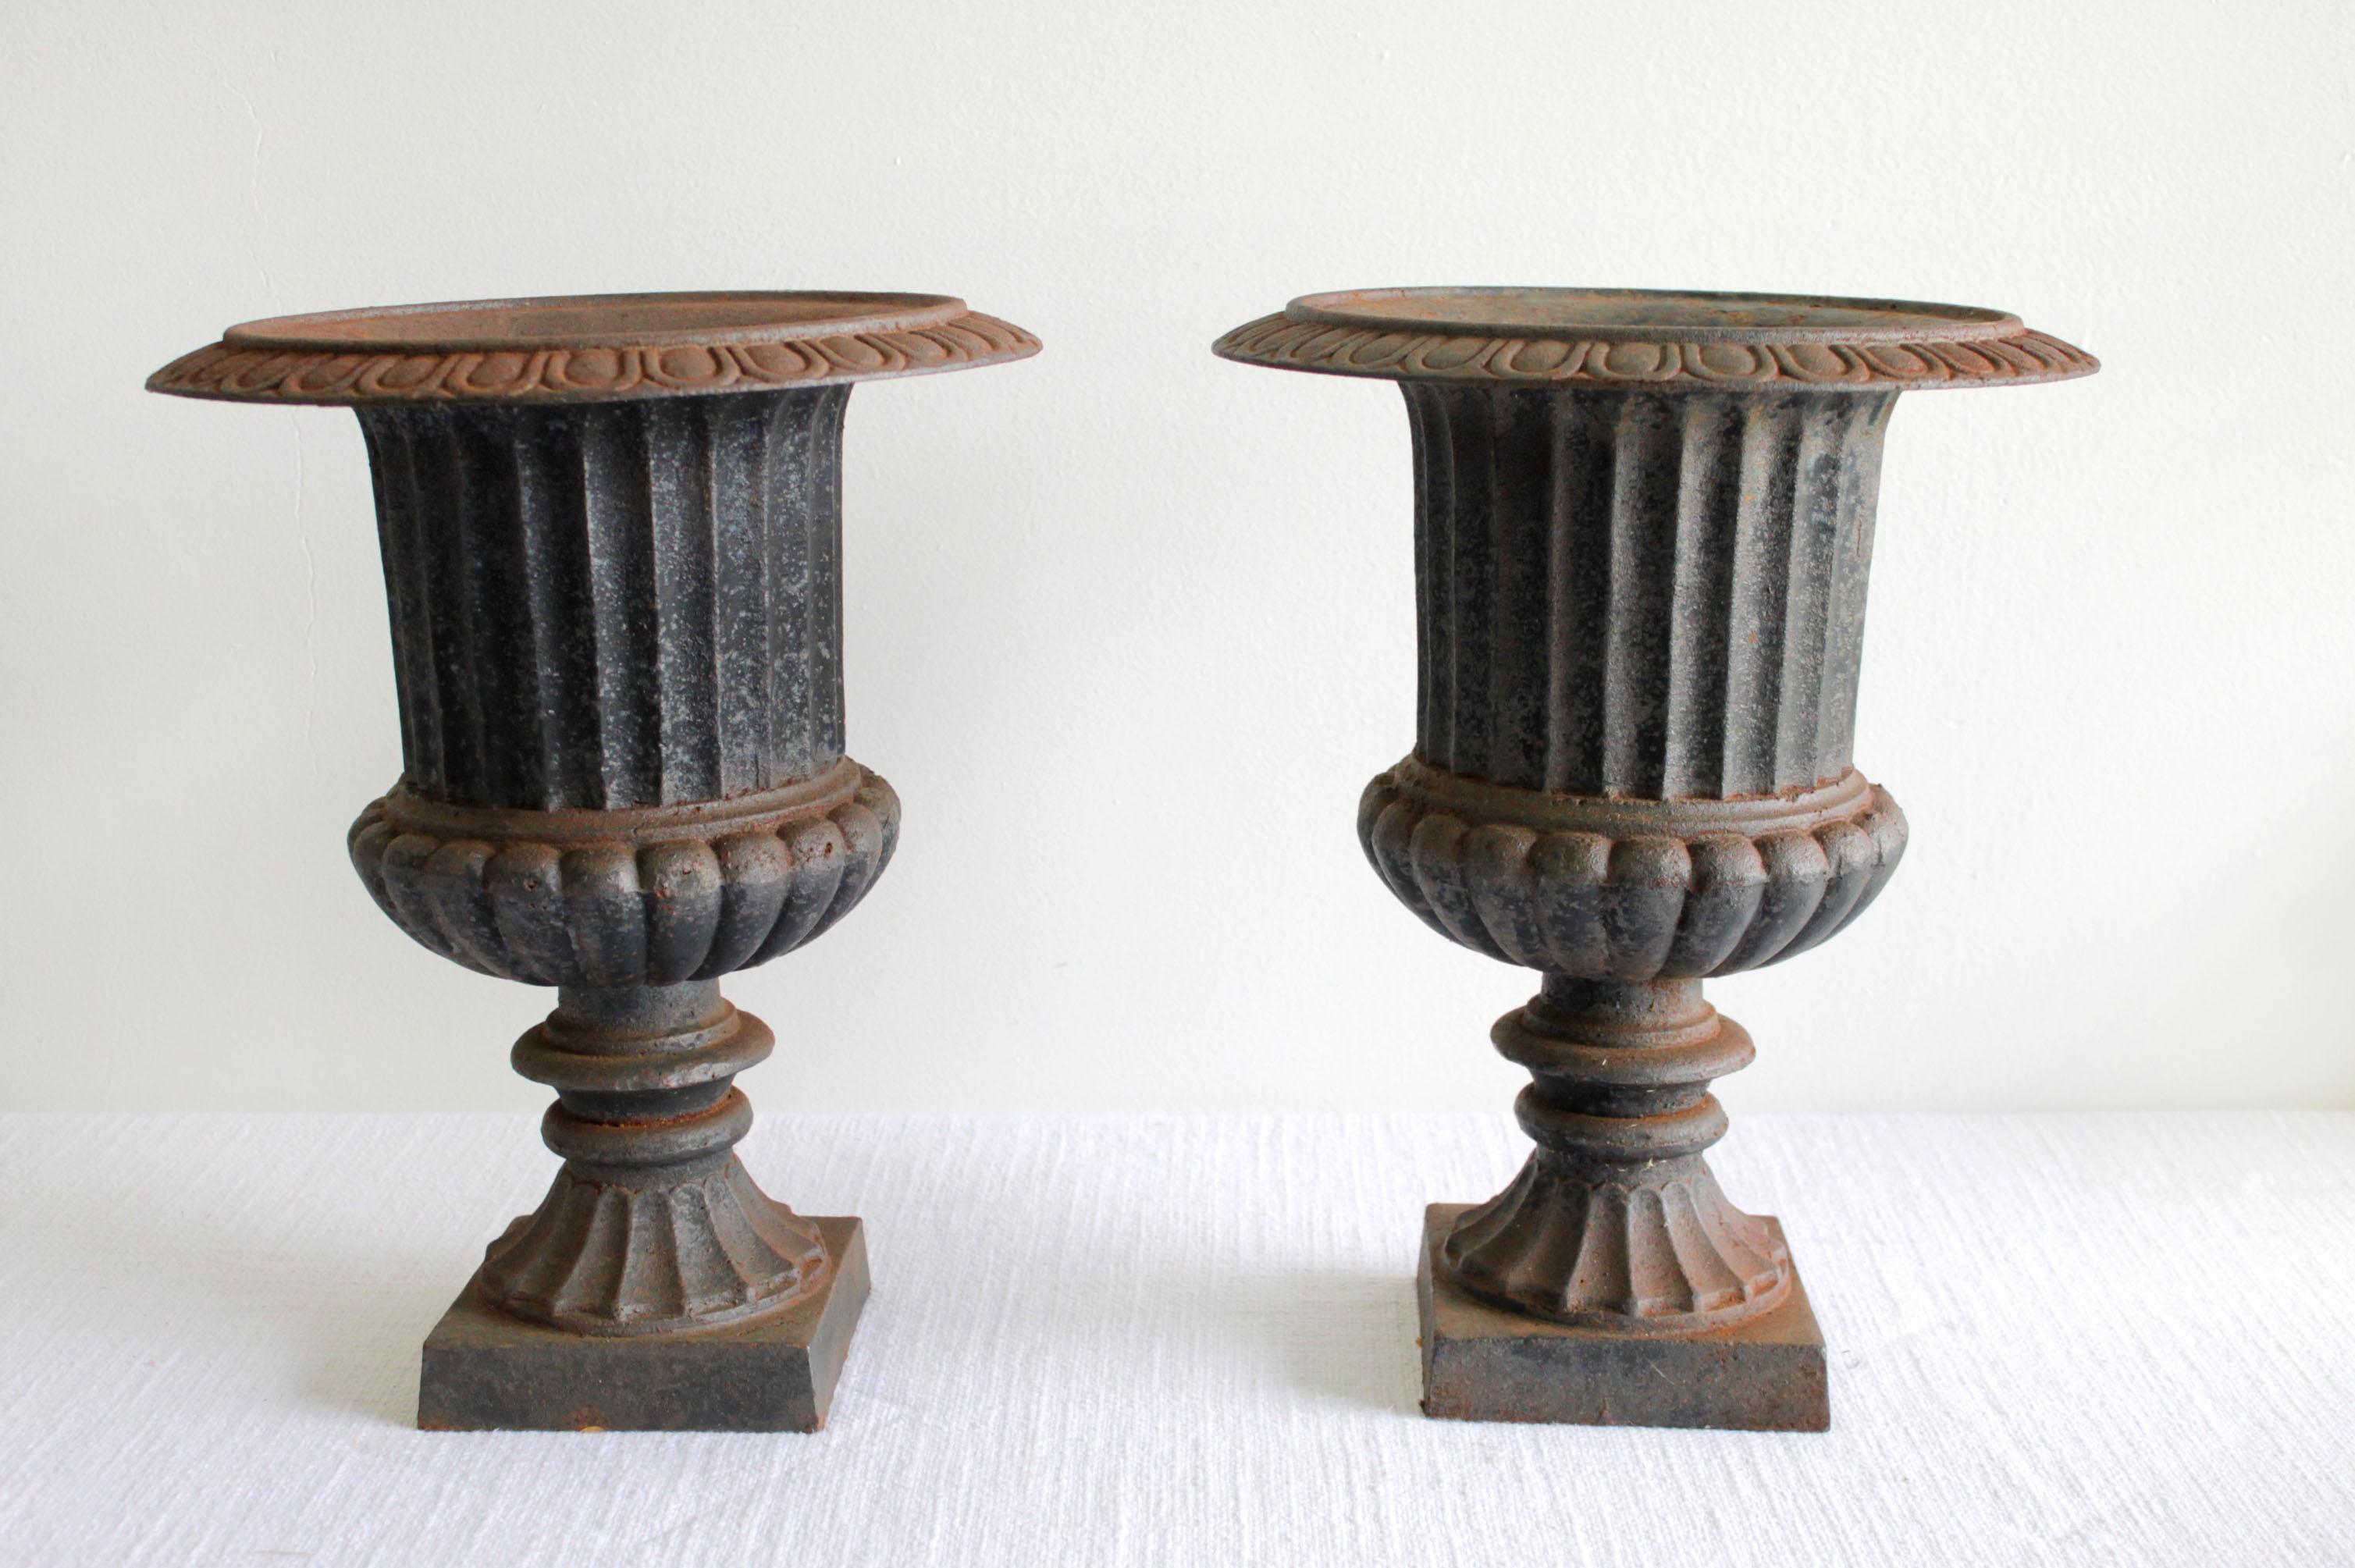 Pair of vintage cast iron pedestal urns
A faded natural patina black that shows age.
Size: 12